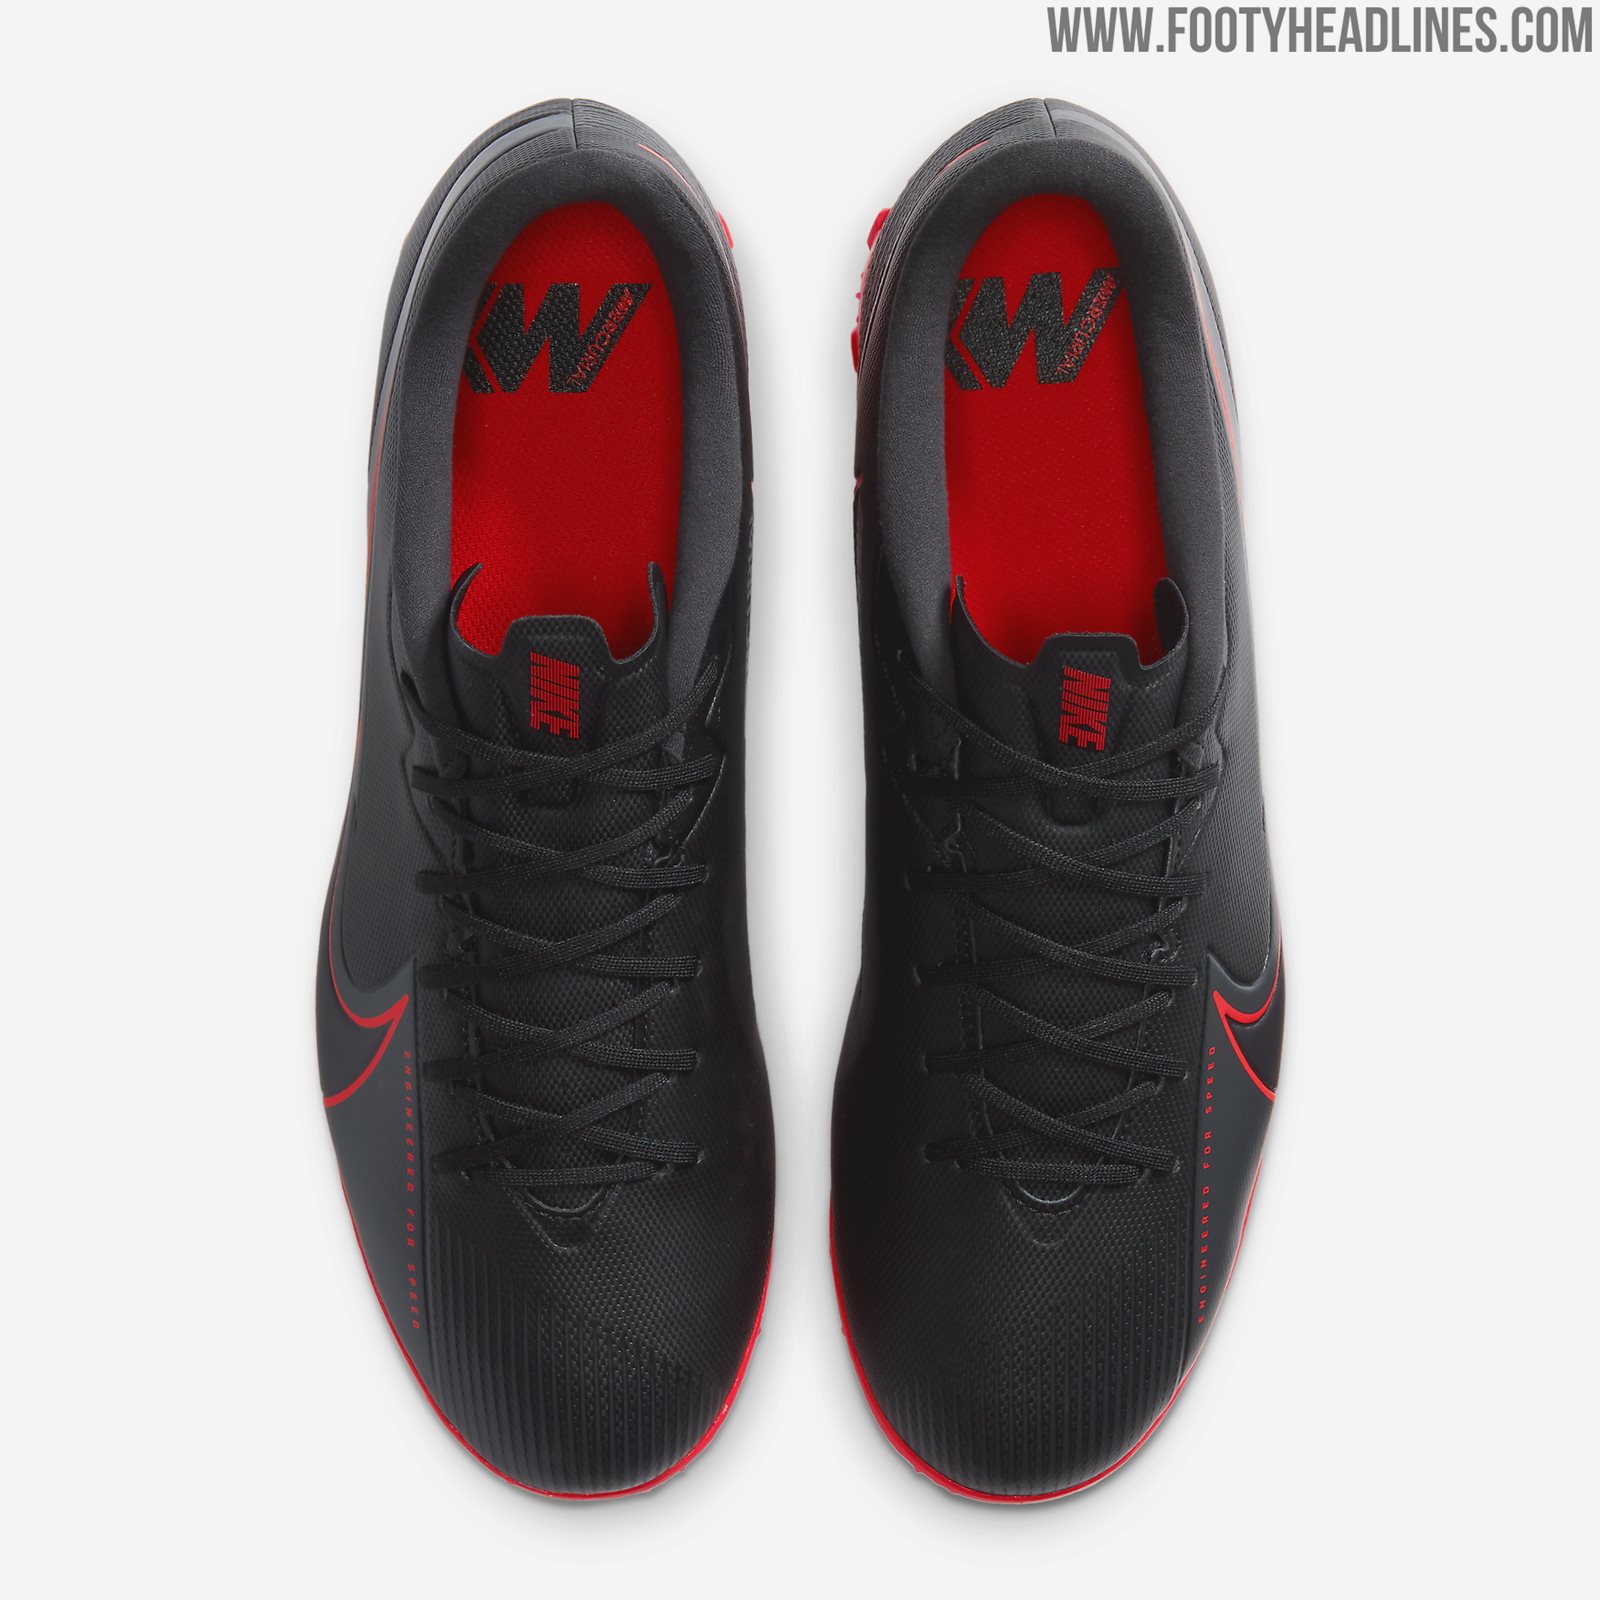 Stunning Black & Red Nike Mercurial Superfly 2020 Boots Leaked ...